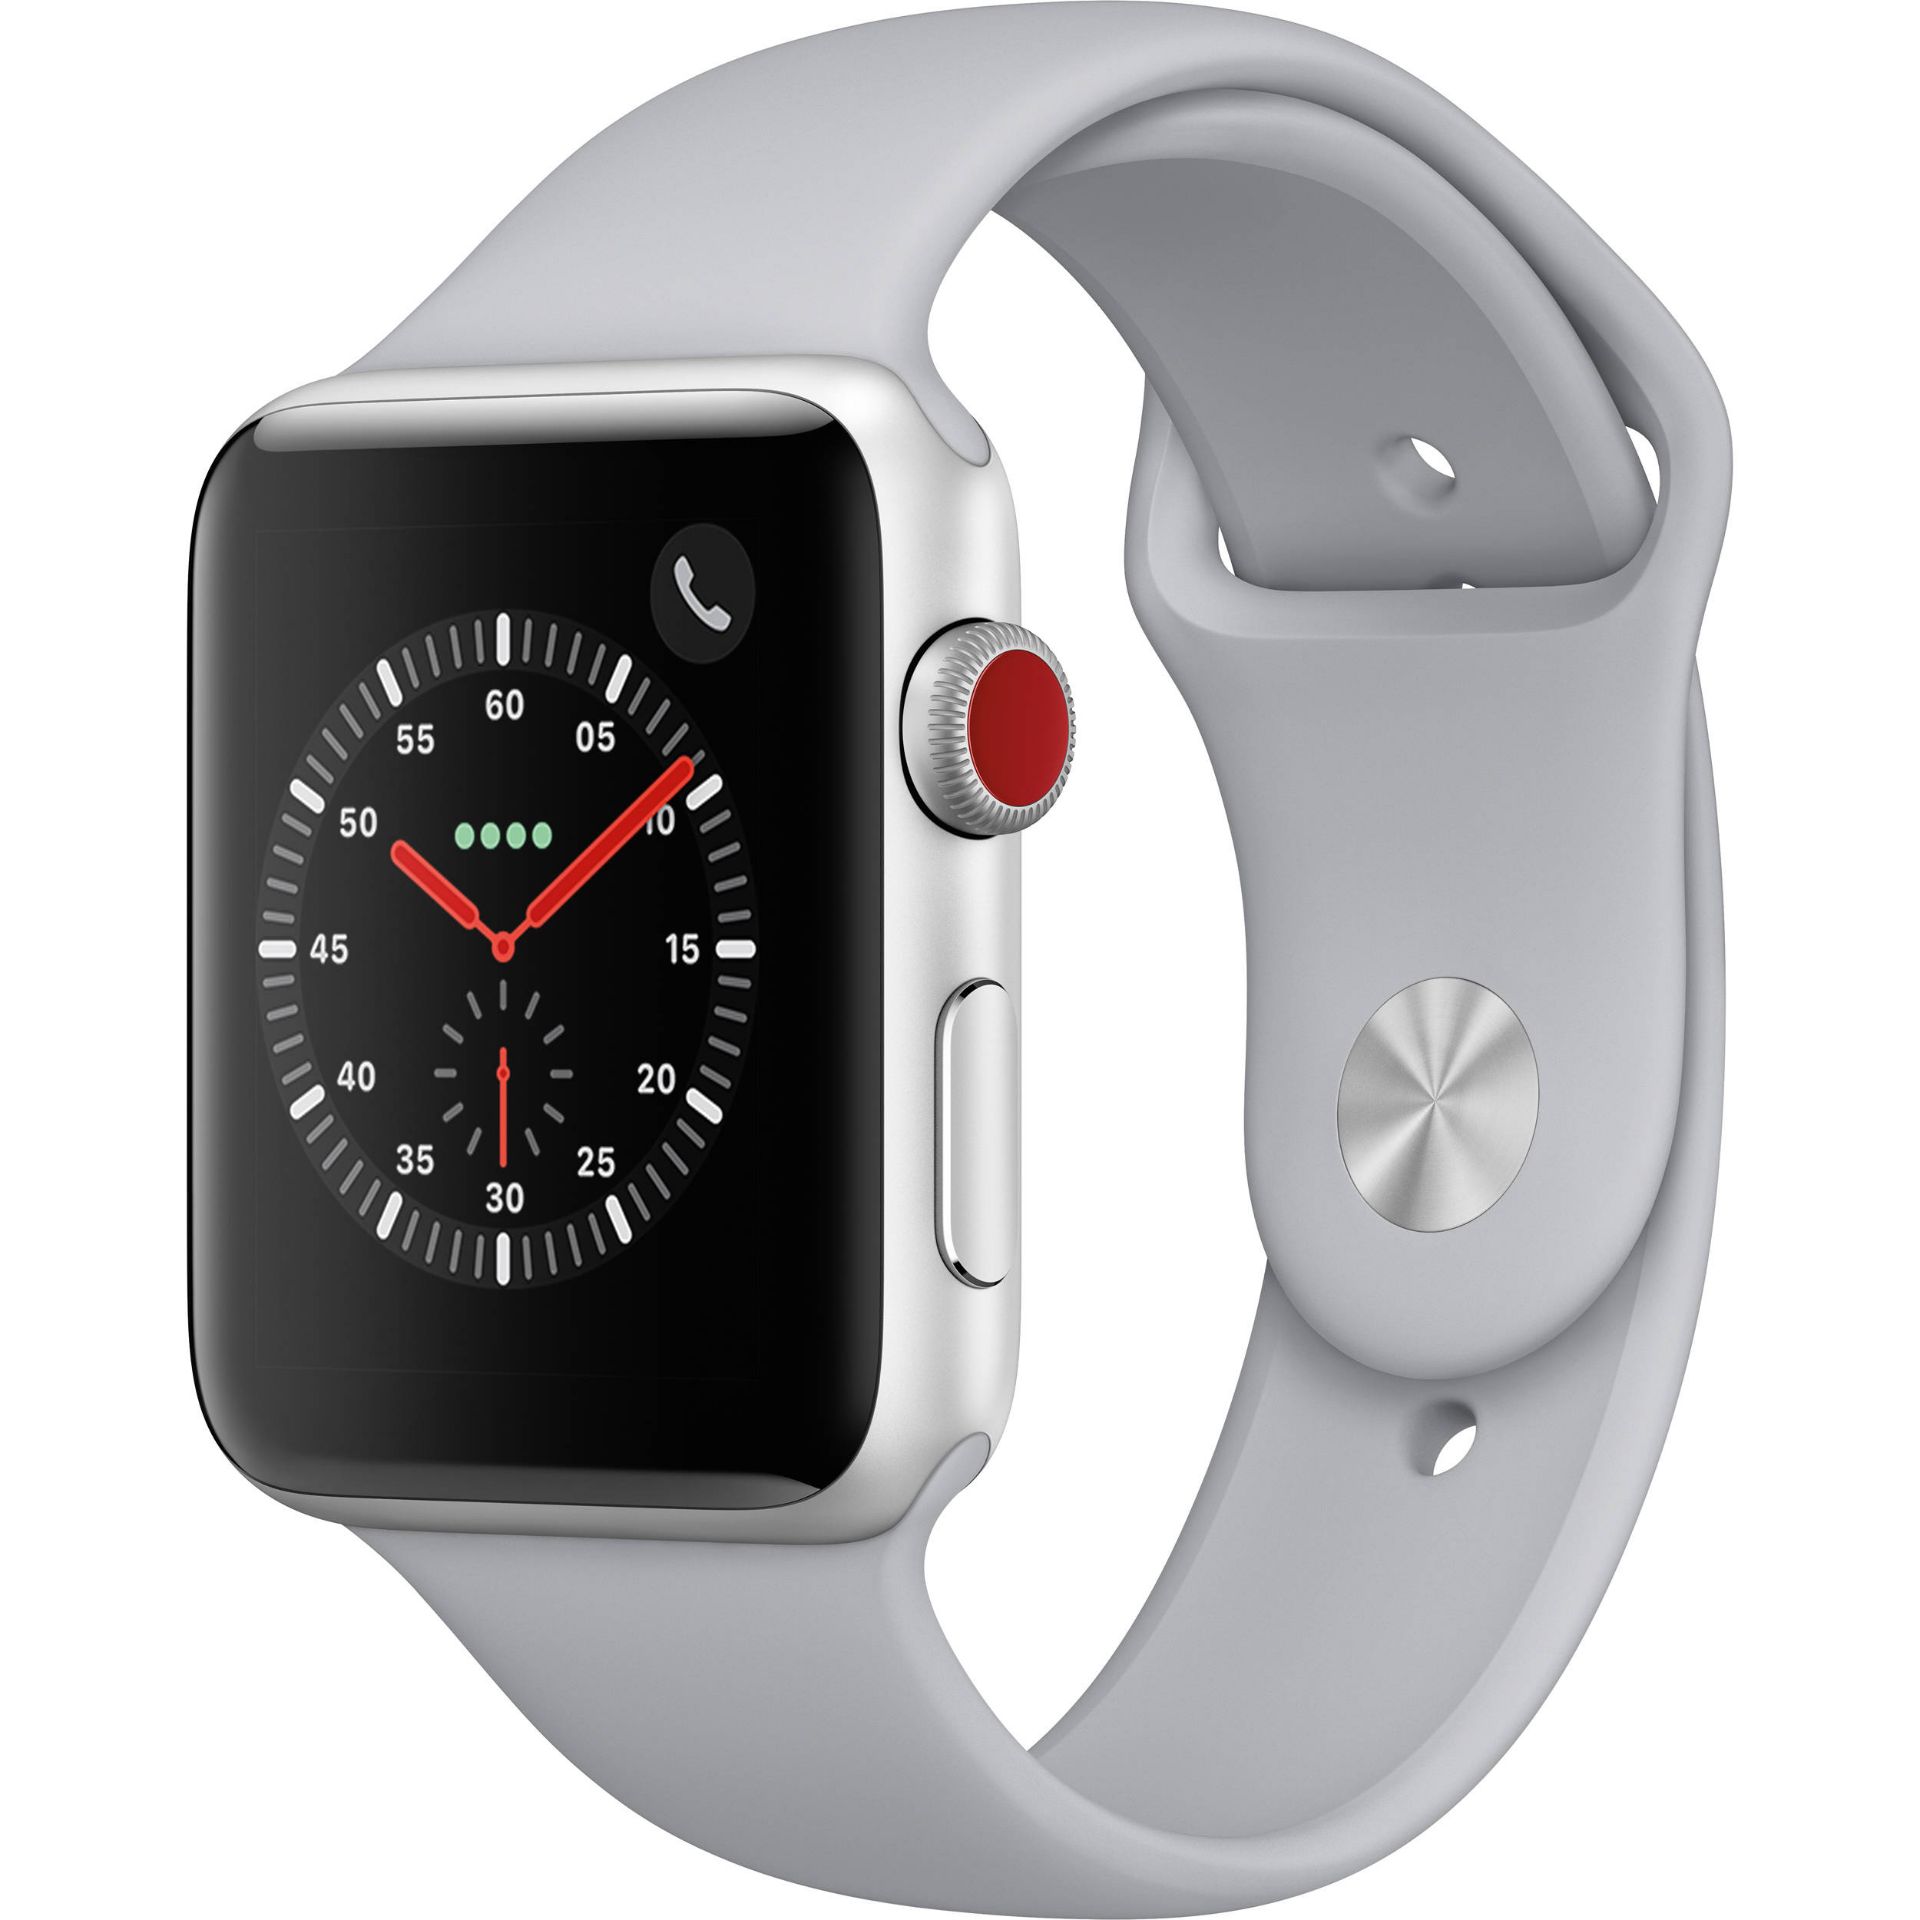 V Grade A Apple Watch Series 3 42mm Silver + Cellular (Brand New Accessories + Strap + Retail